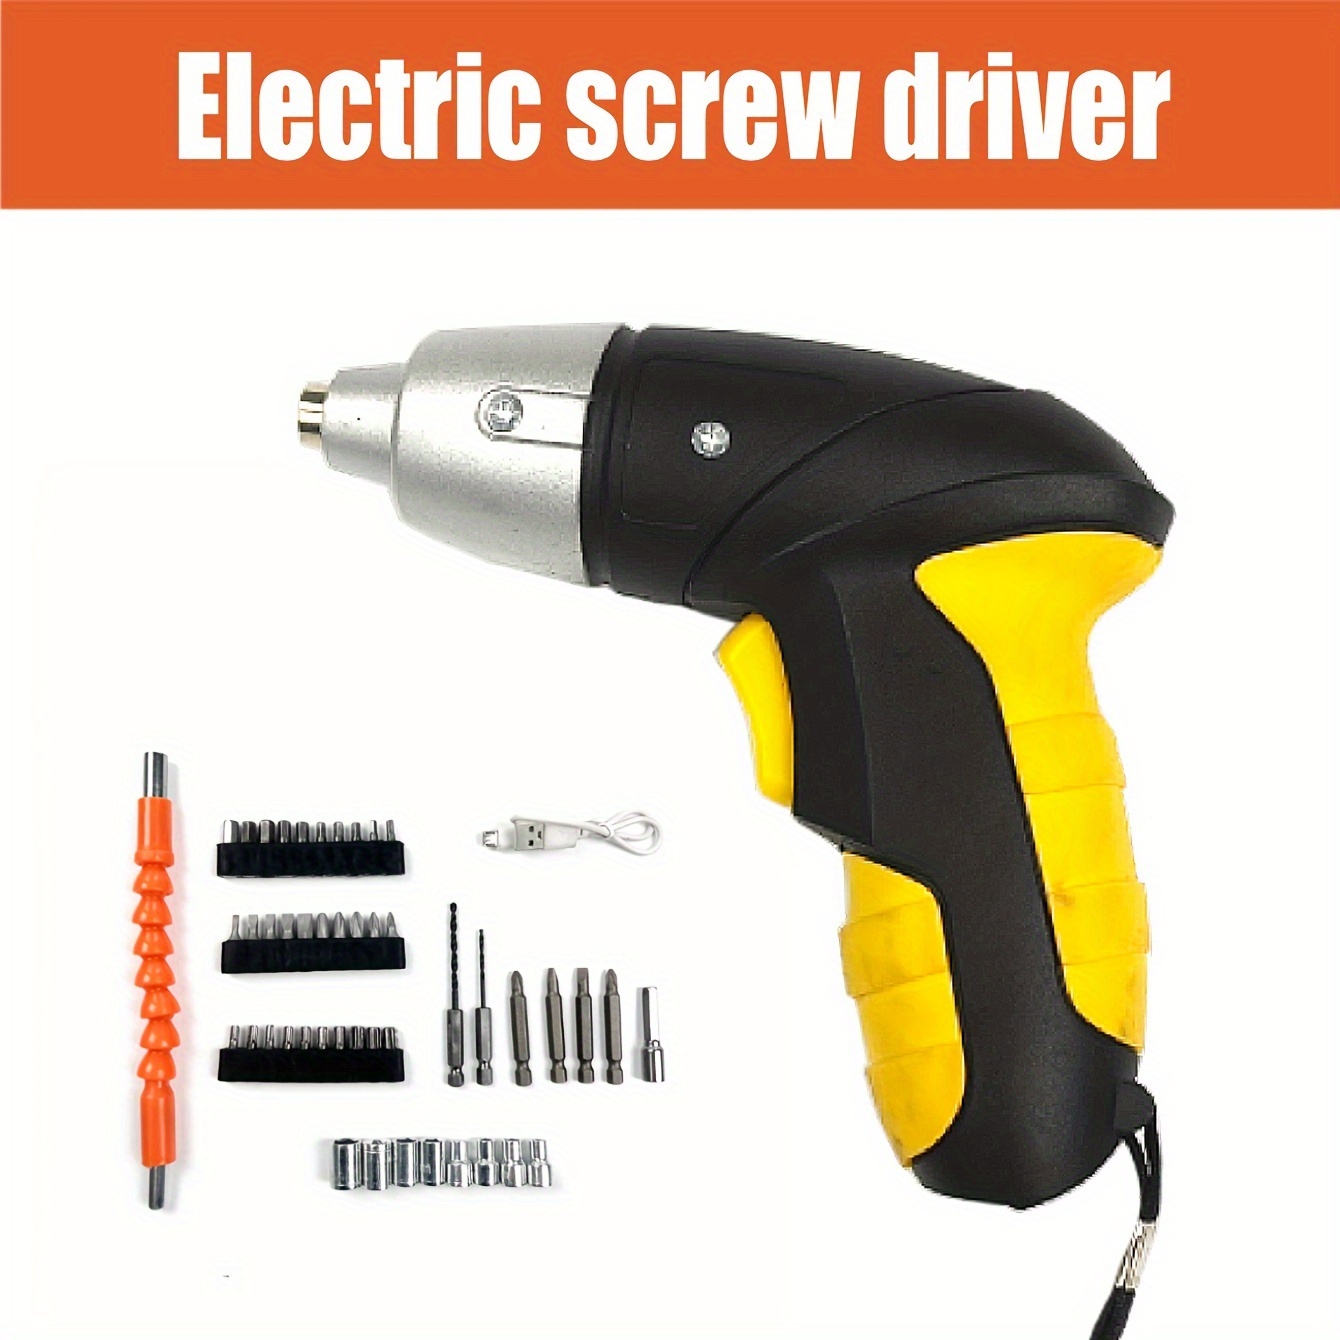 3 In 1 Cardboard Cutter Electric Screwdriver With Wine Opener, Cordless  Electric Scissors, 4v Rechargeable Screwdriver With Bottle Opener, 34pcs  Magnetic Precision Drill Bits, With 8 Adapters, Rotating Handle, And  Carrying Case